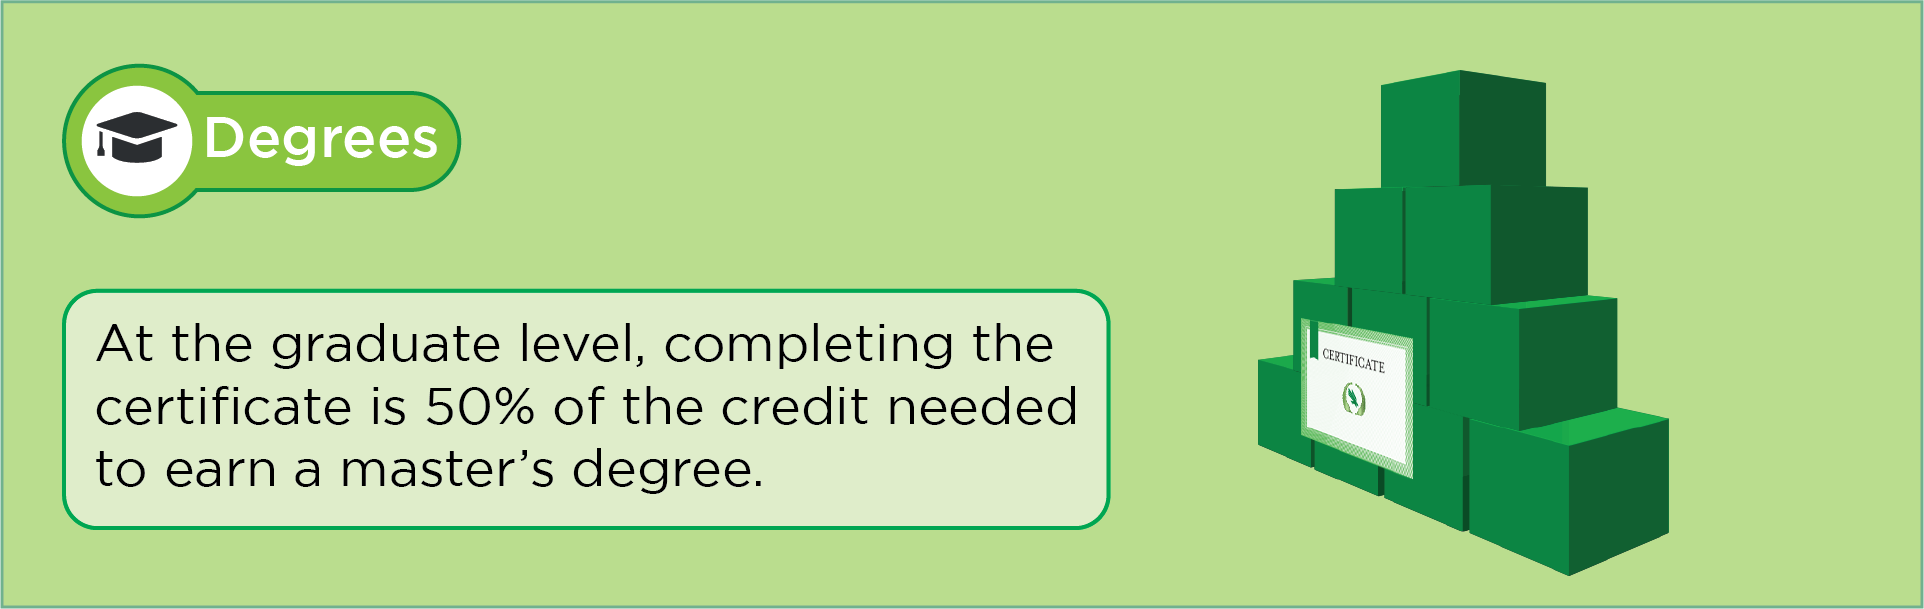  at the graduate level, completing the certificate is 50% of the credit needed to earn a master's degree